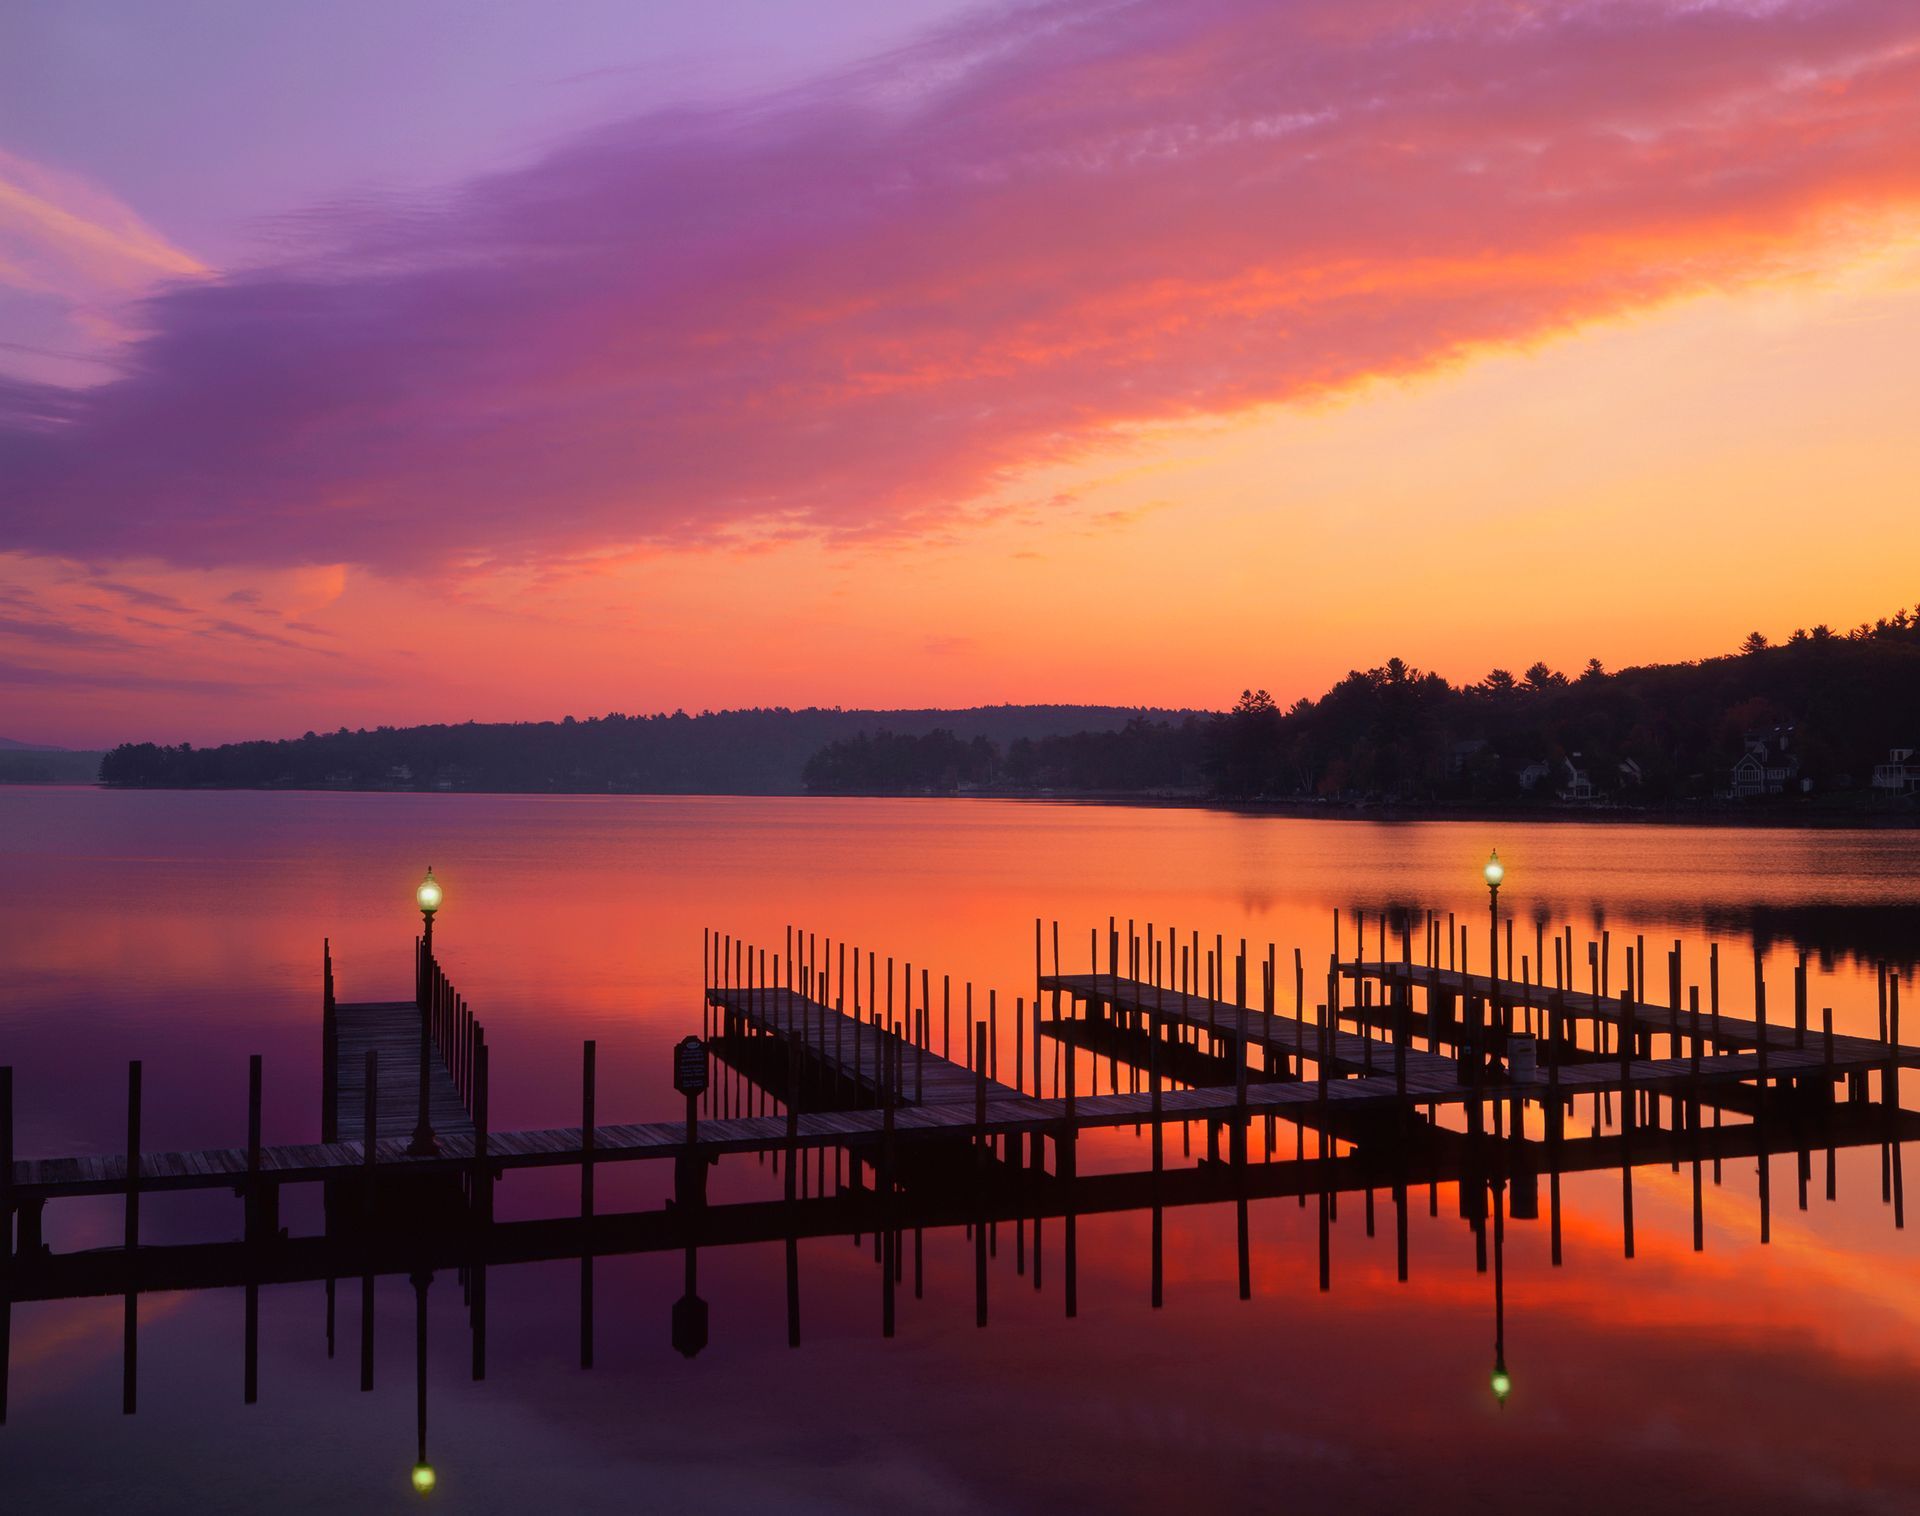 A sunset over a lake with a dock in the foreground